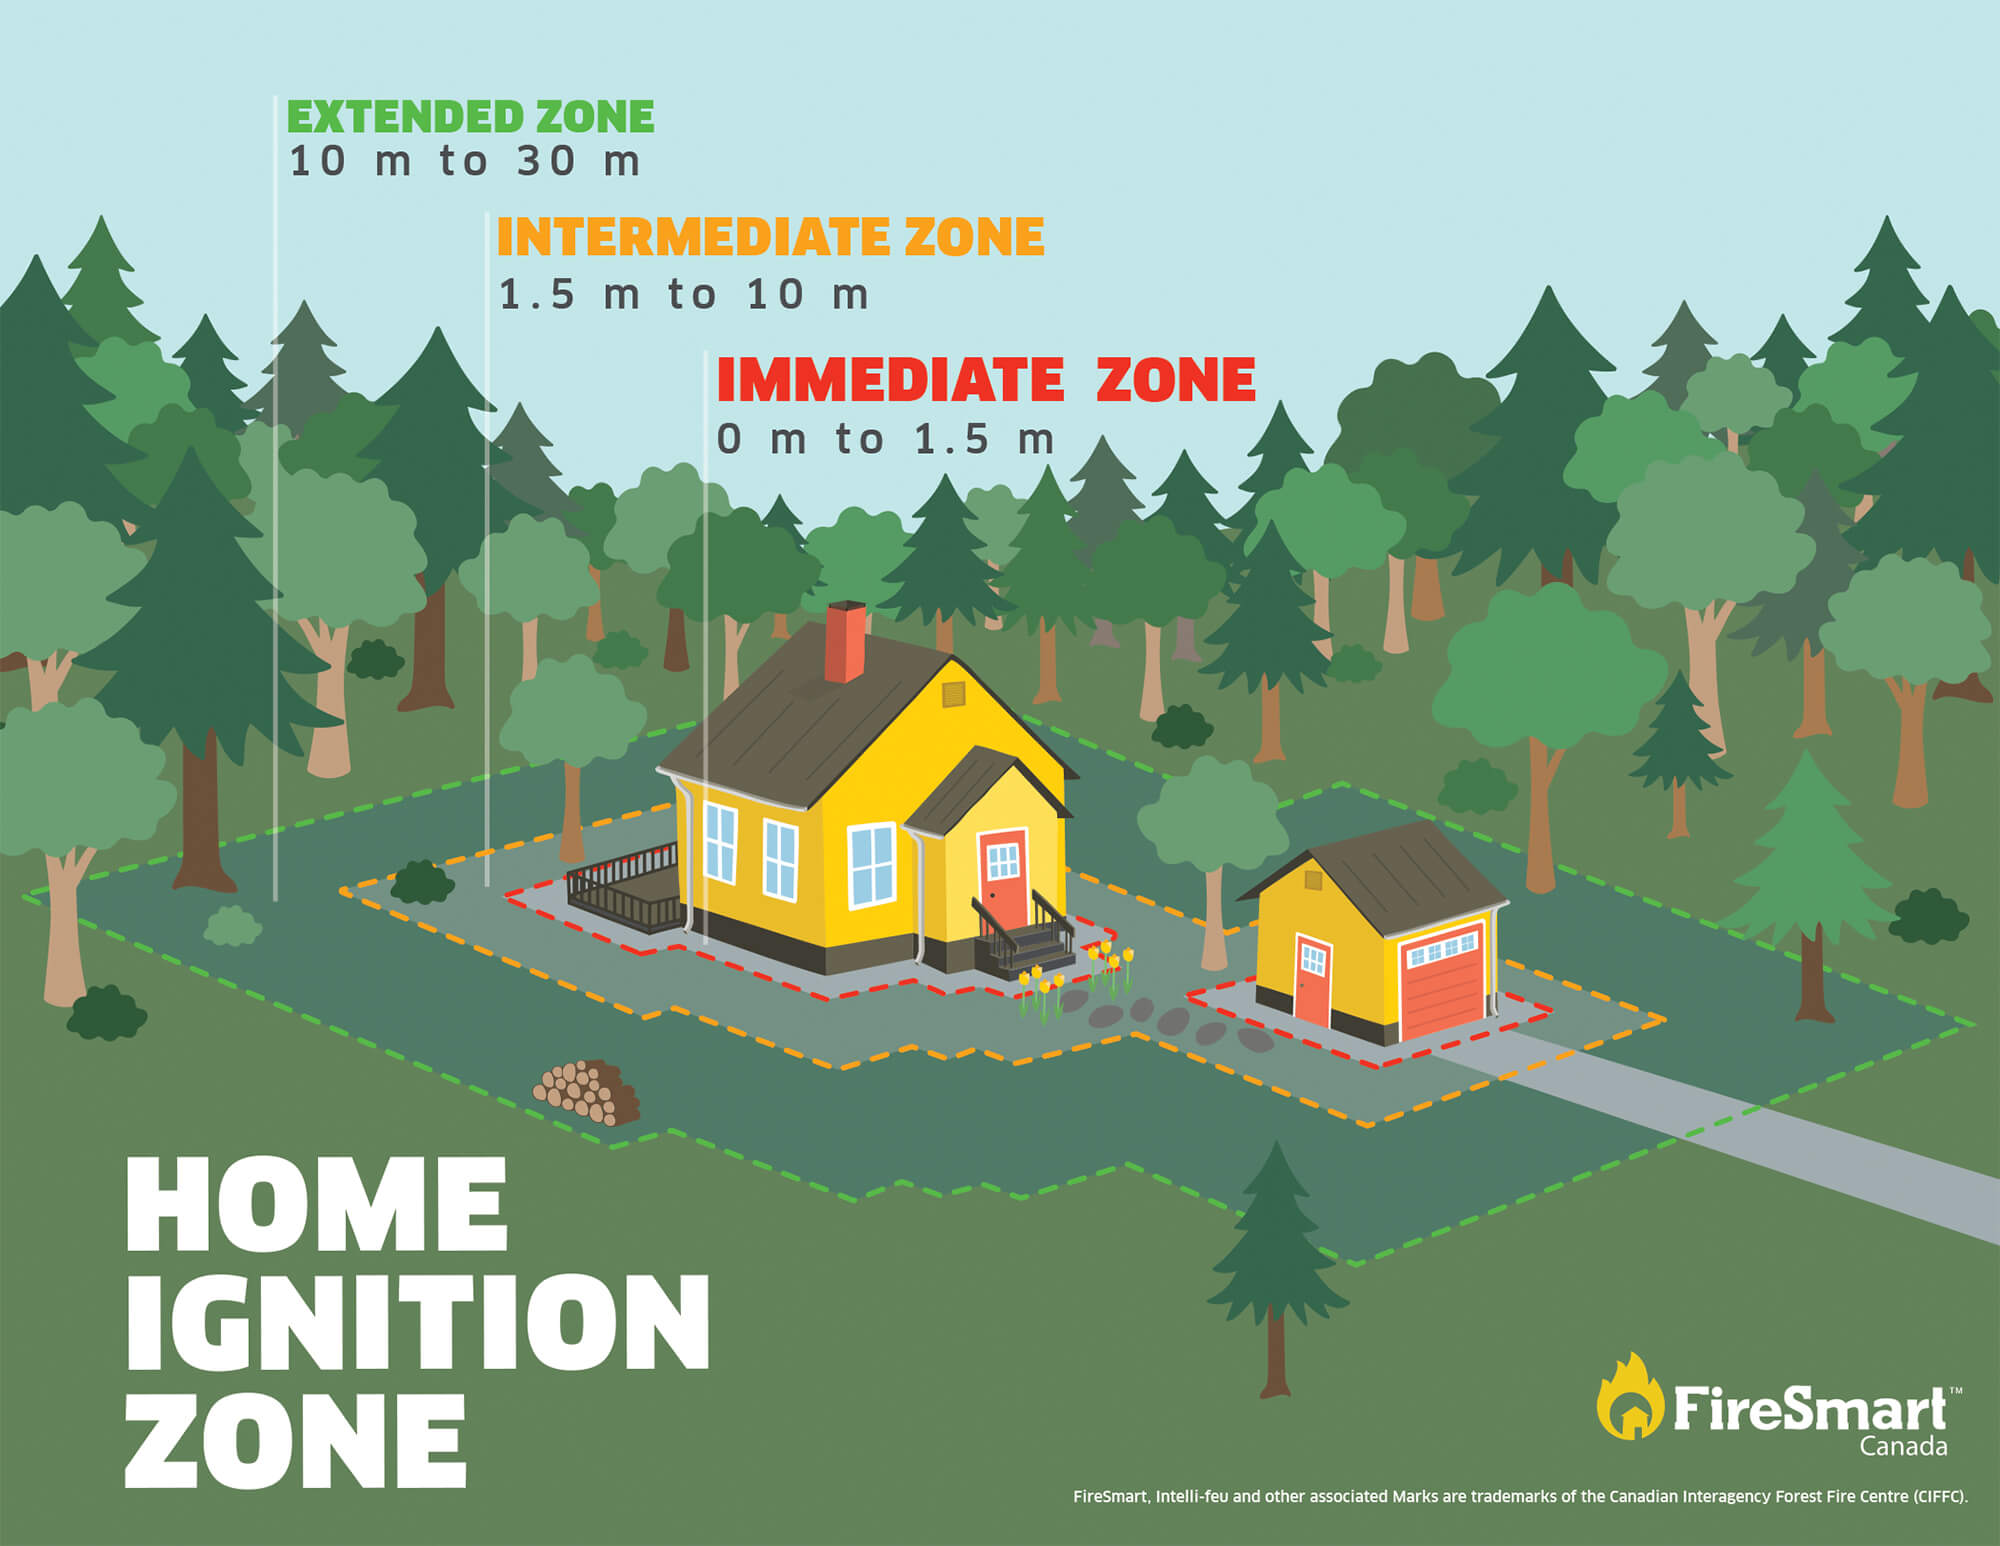 Home ignition zone